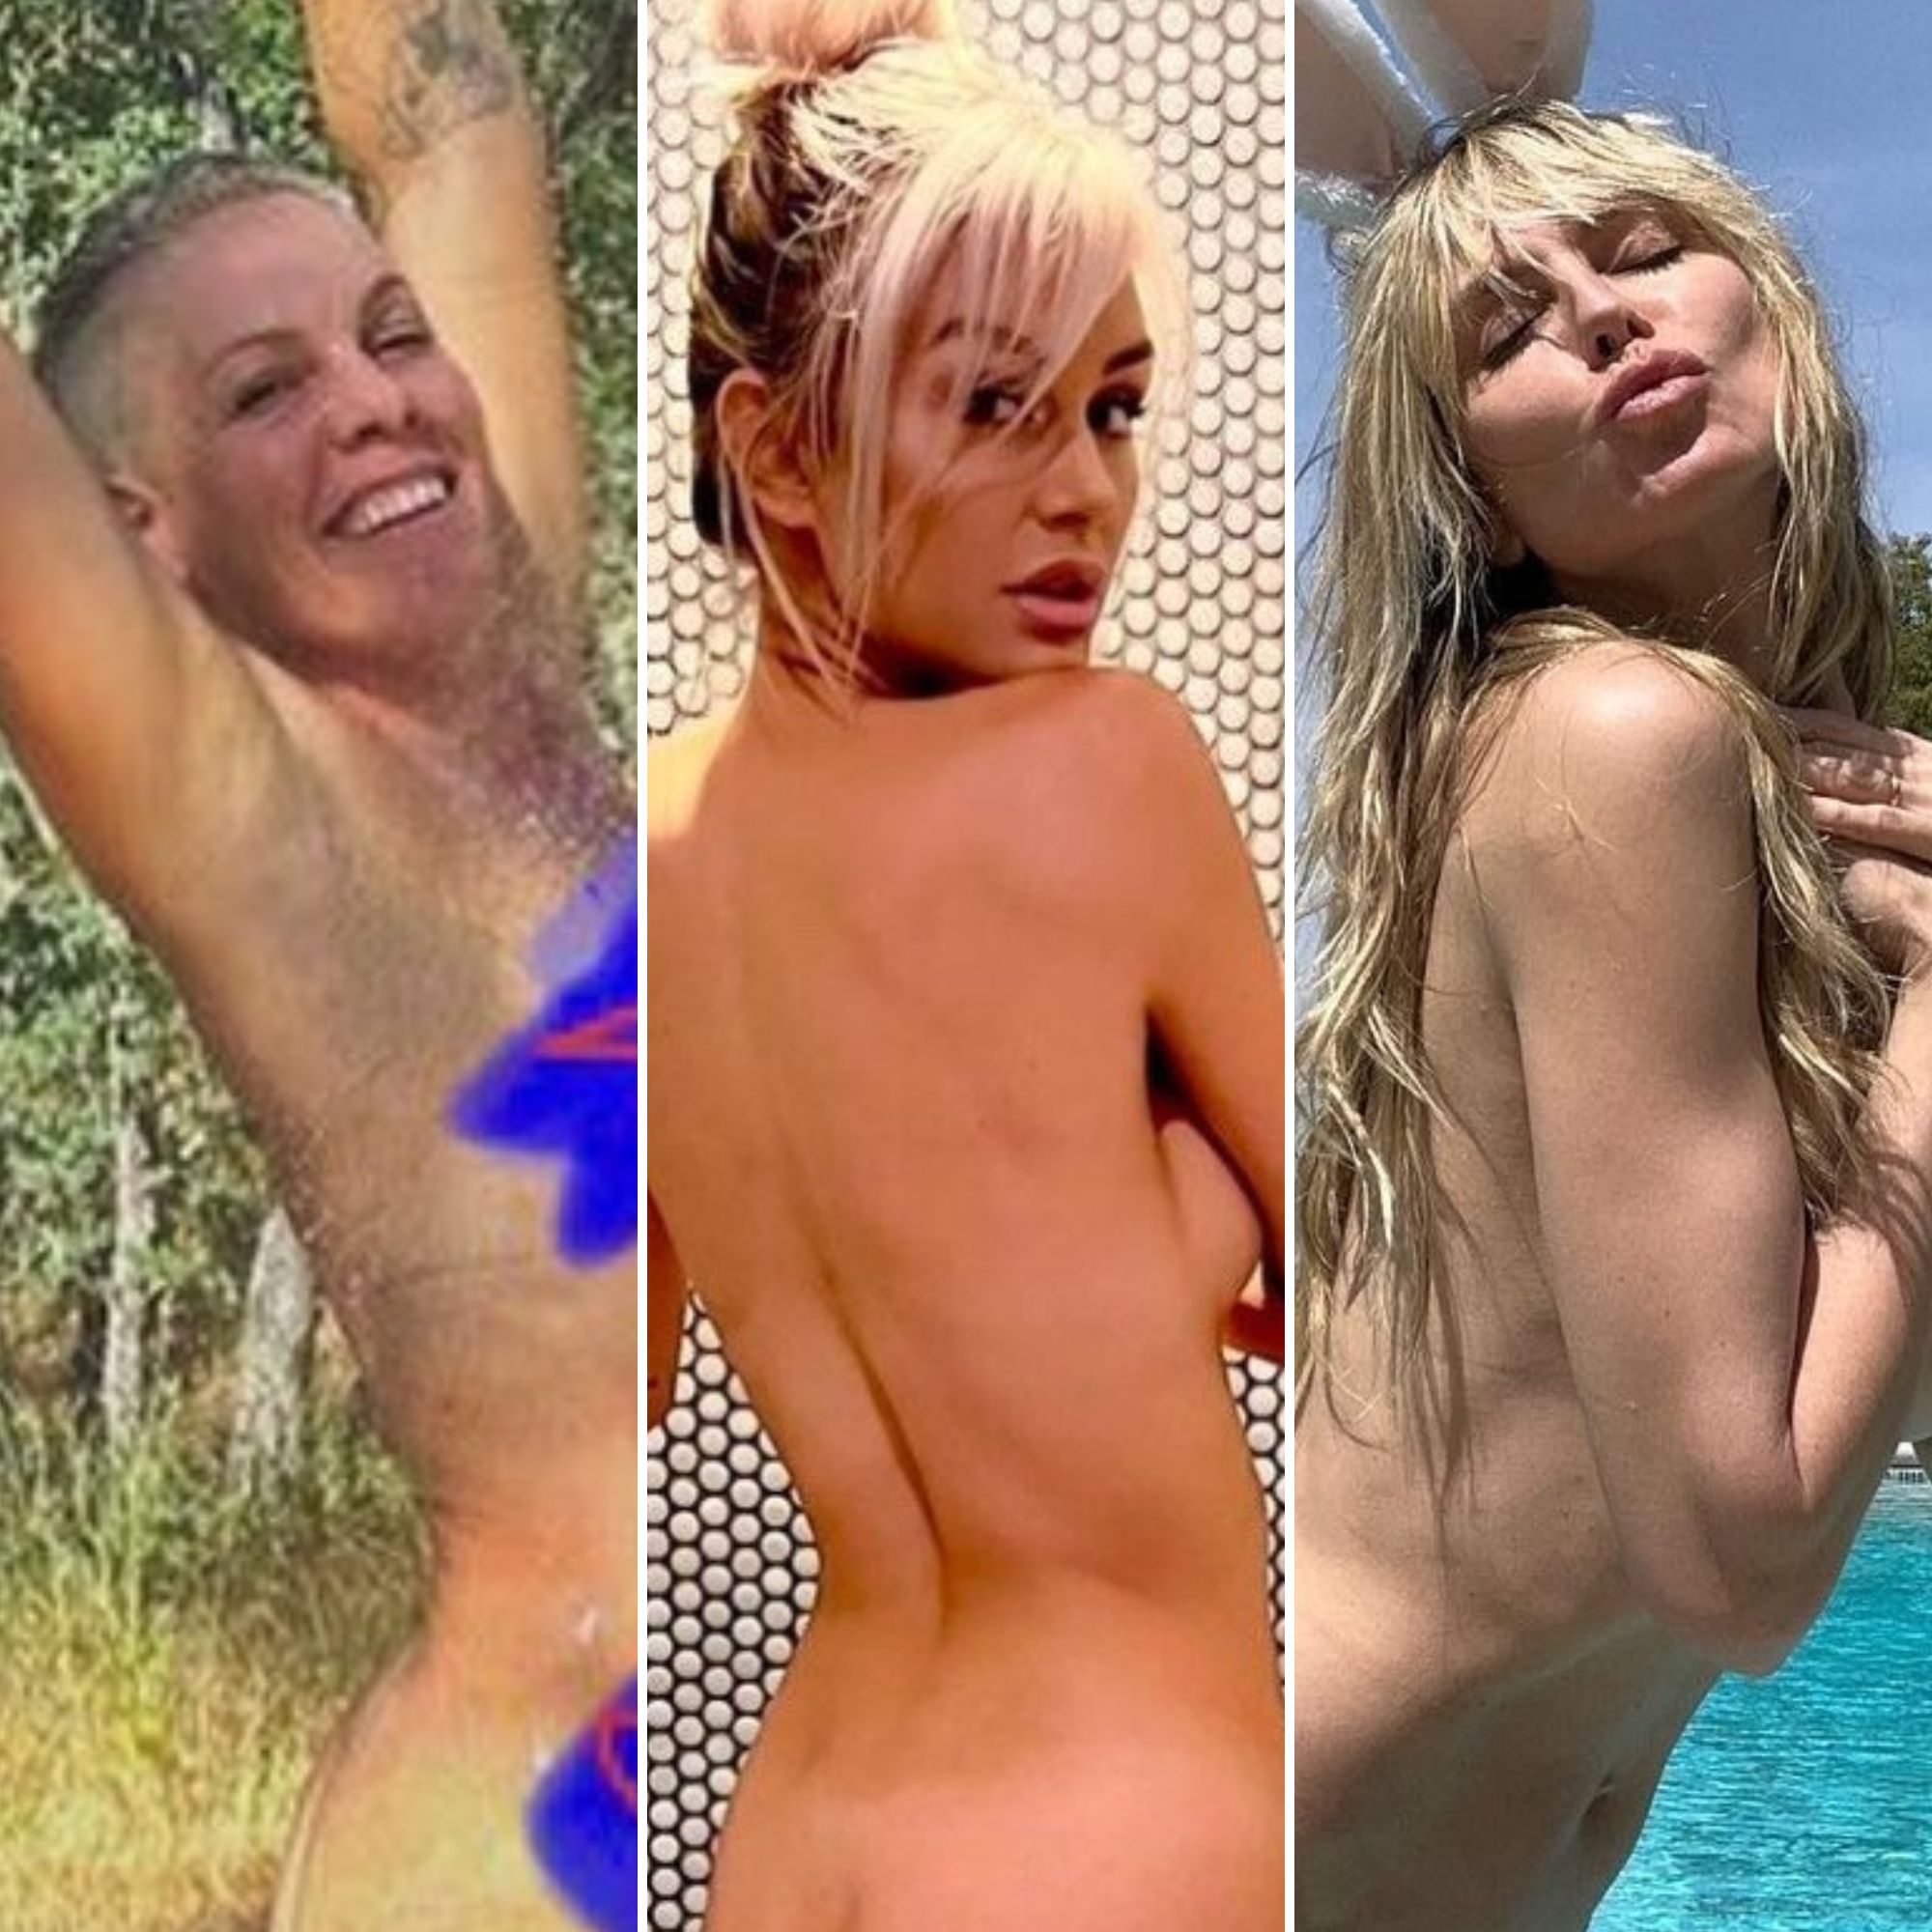 Real Celebrity Nude Porn - Celebrities Who Post Nude Photos: See Naked Pictures of Stars